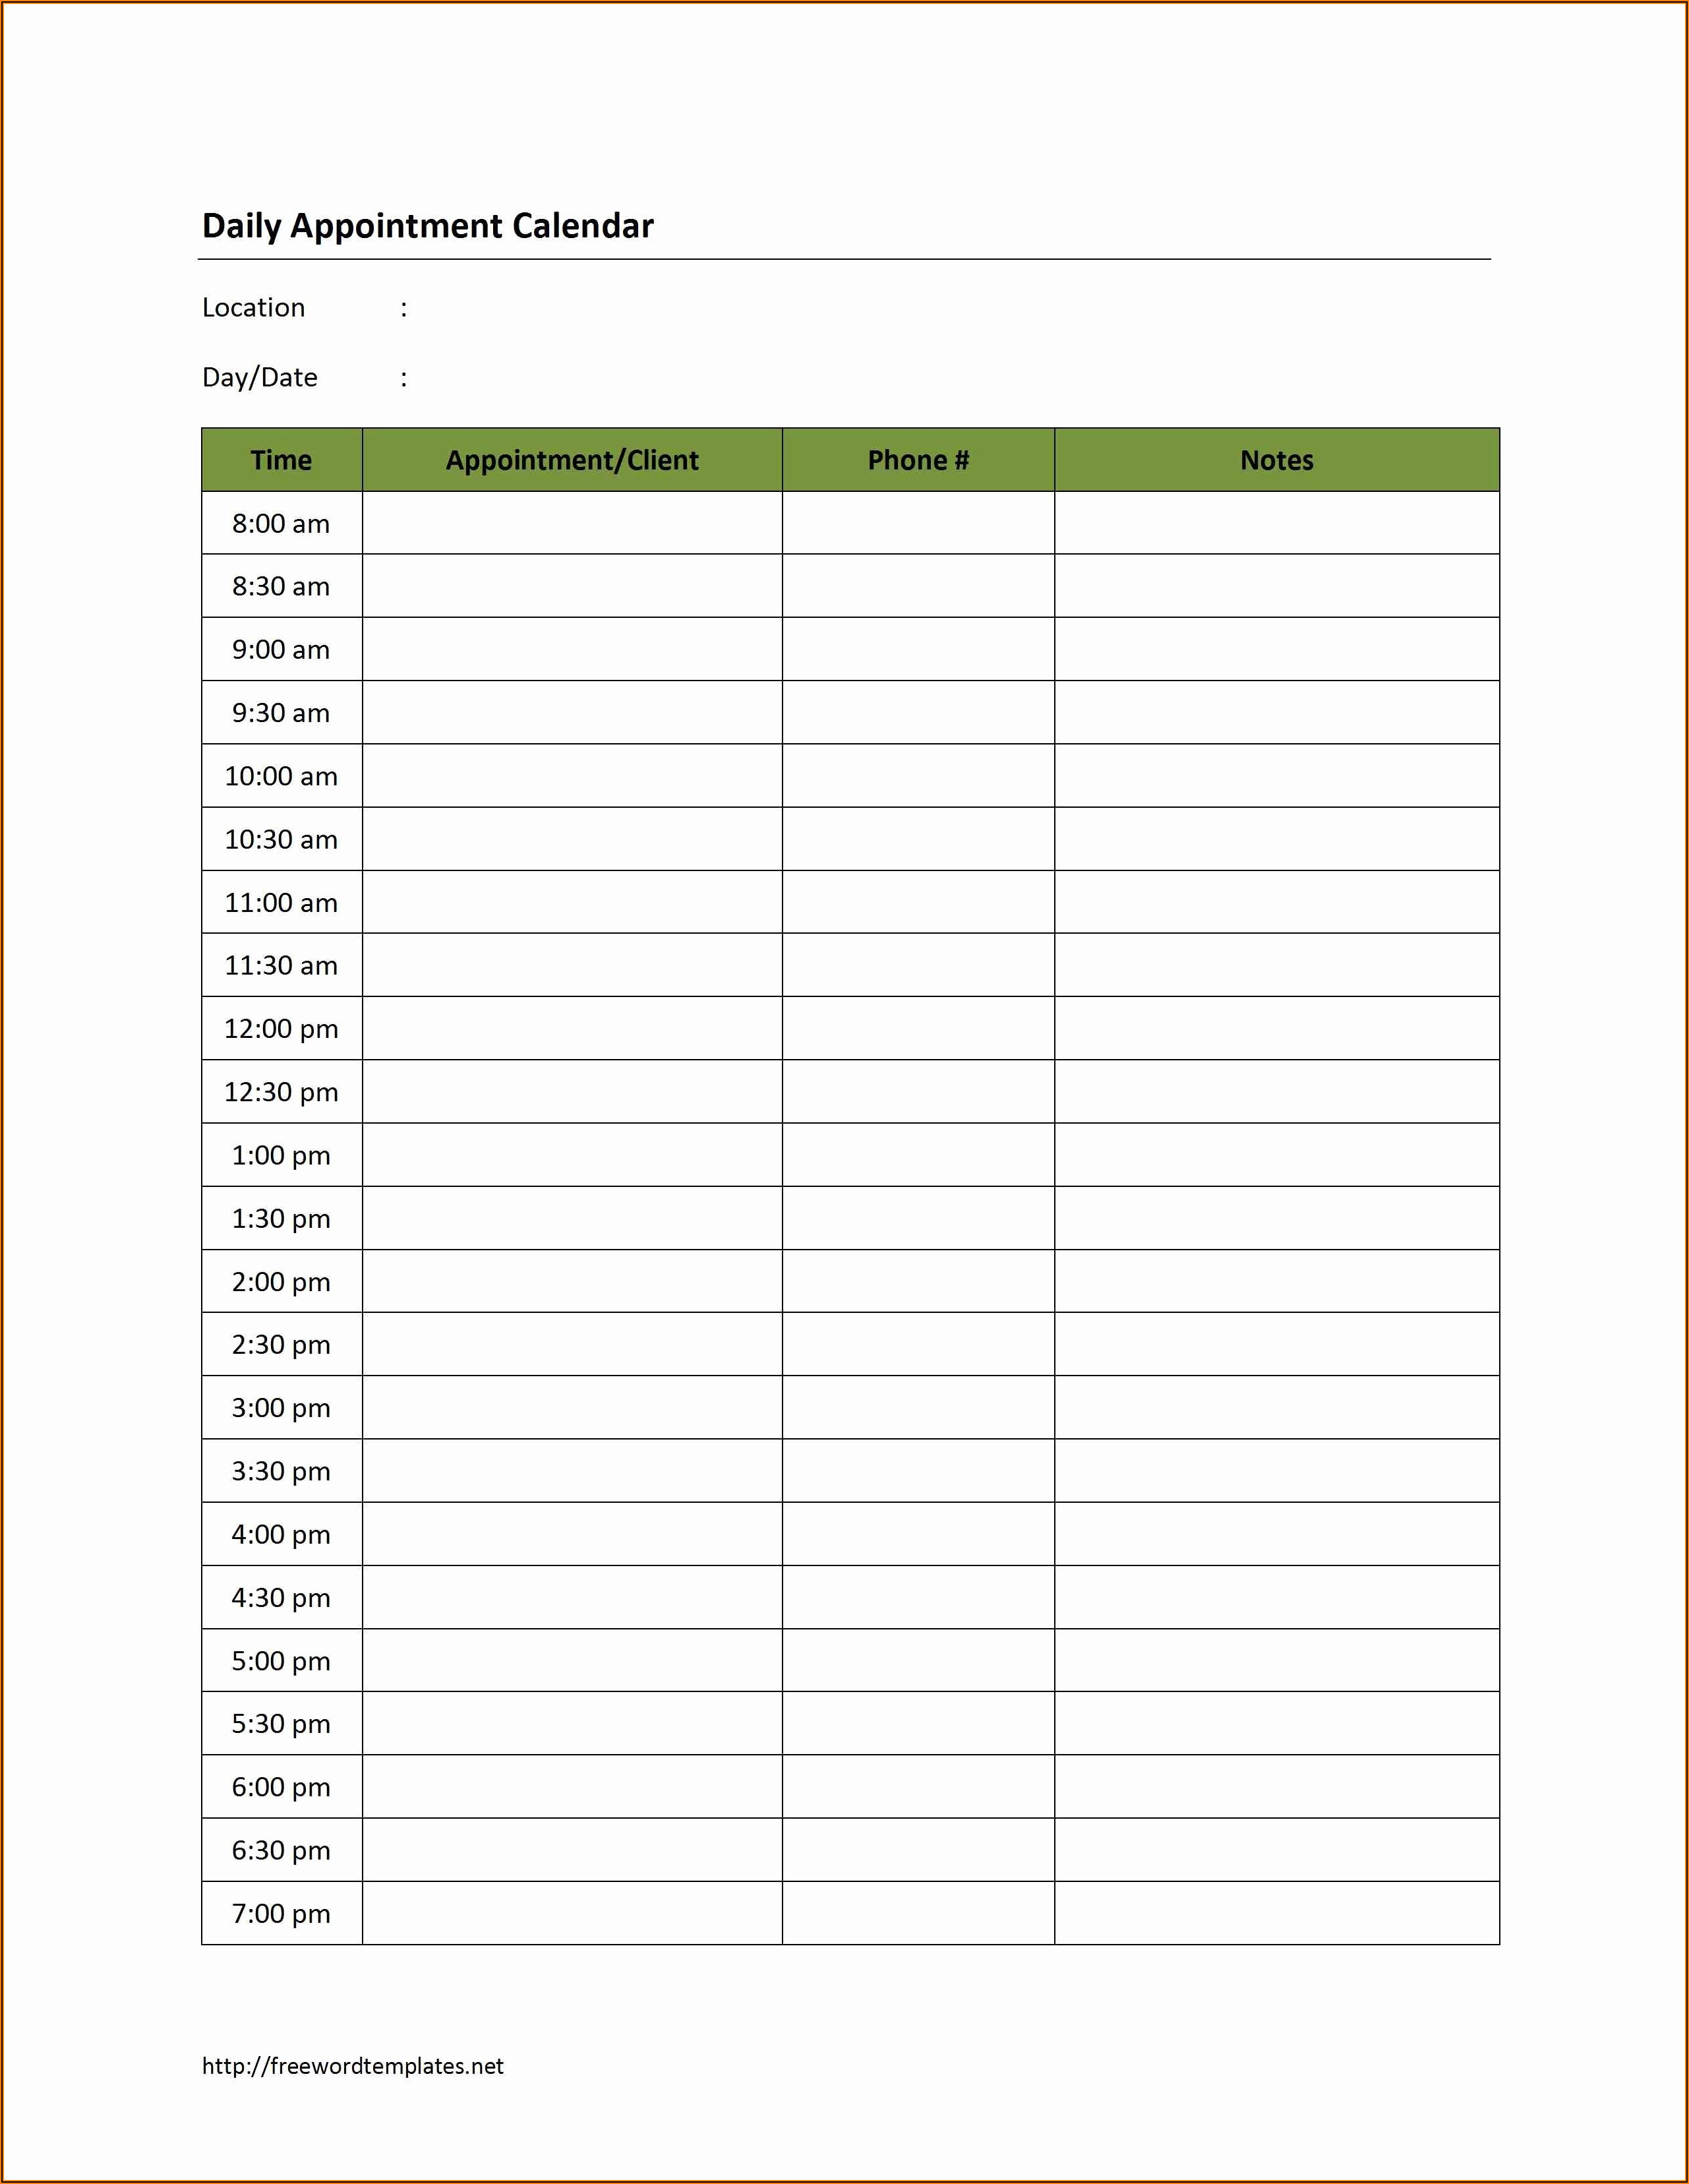 Daily Appointment Calendar Template 2020